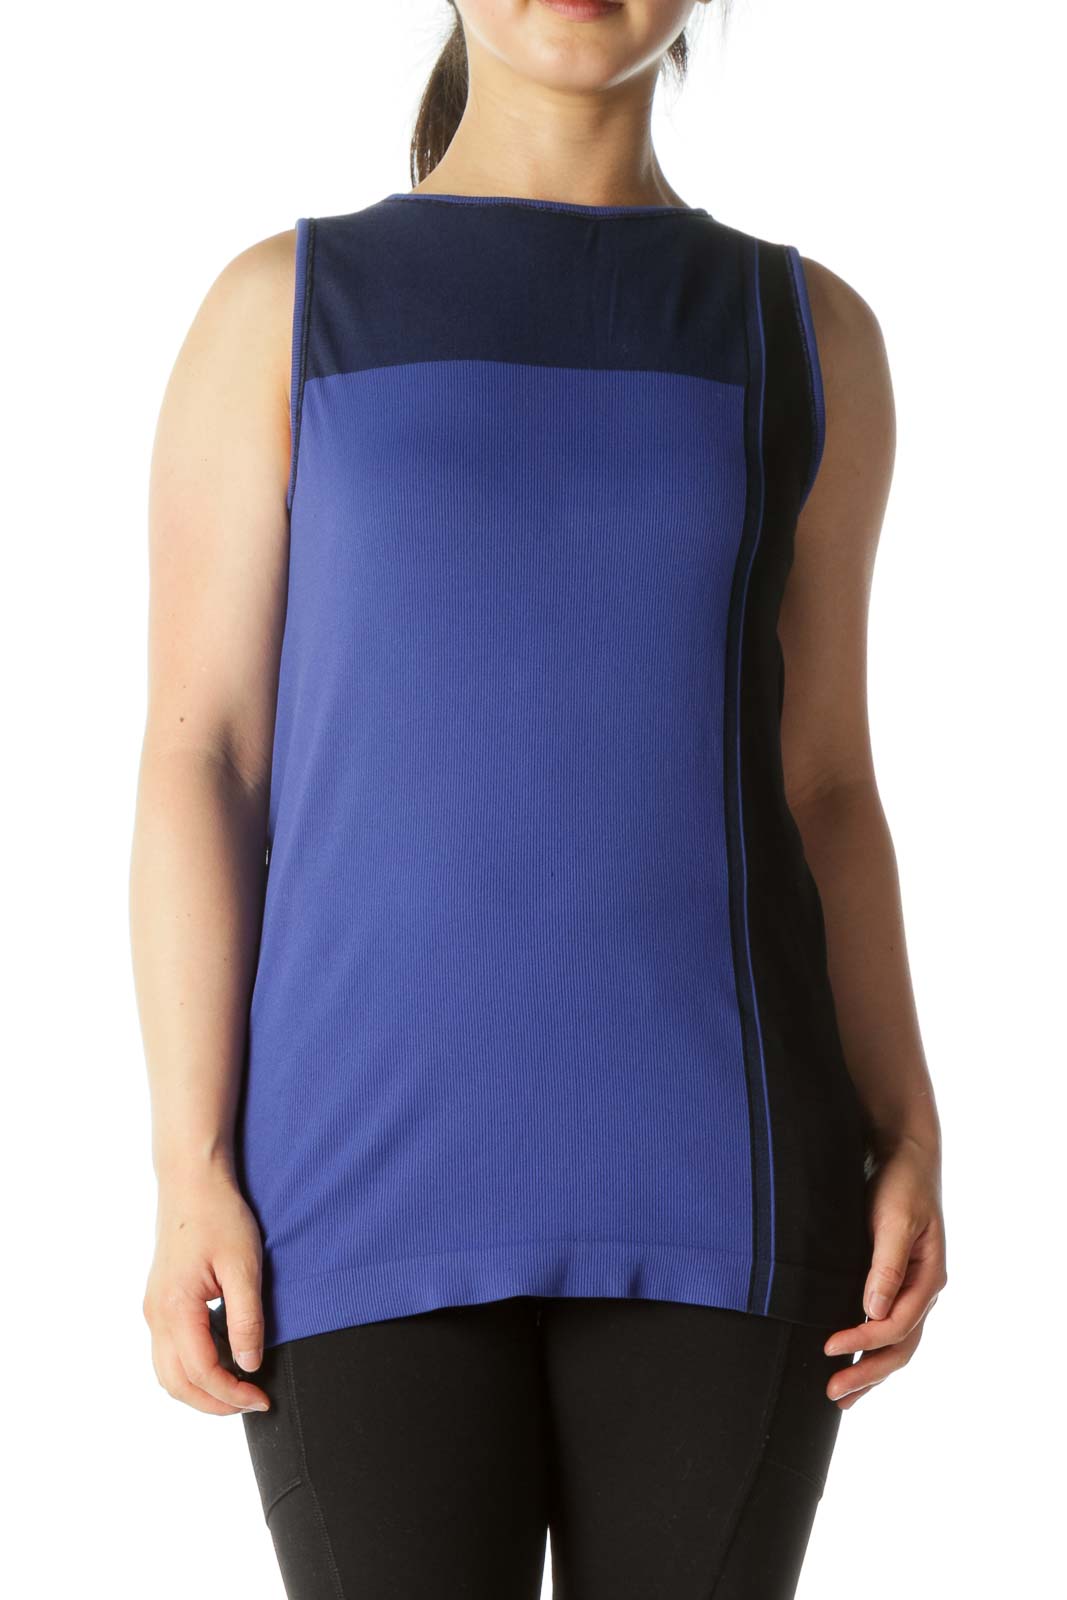 Blue Sleeveless Sports Top Front